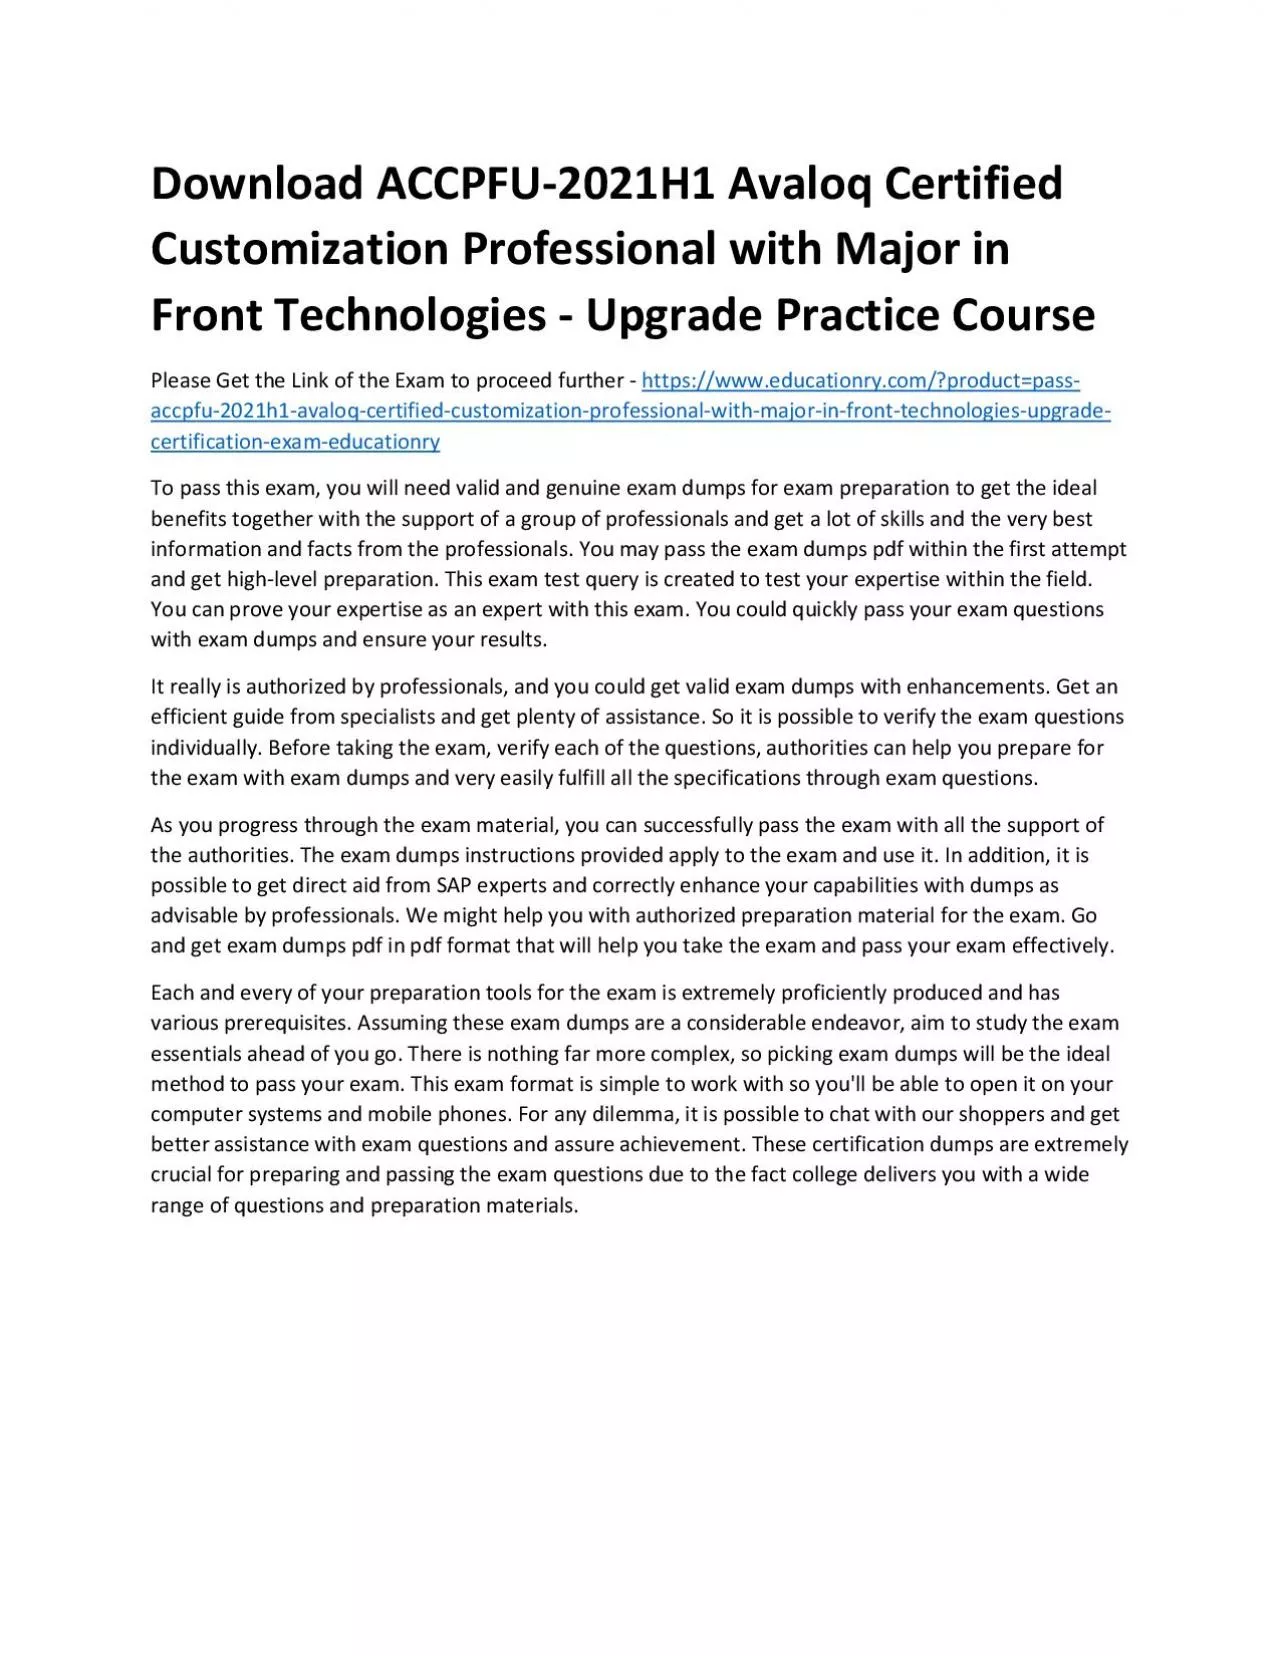 Download ACCPFU-2021H1 Avaloq Certified Customization Professional with Major in Front